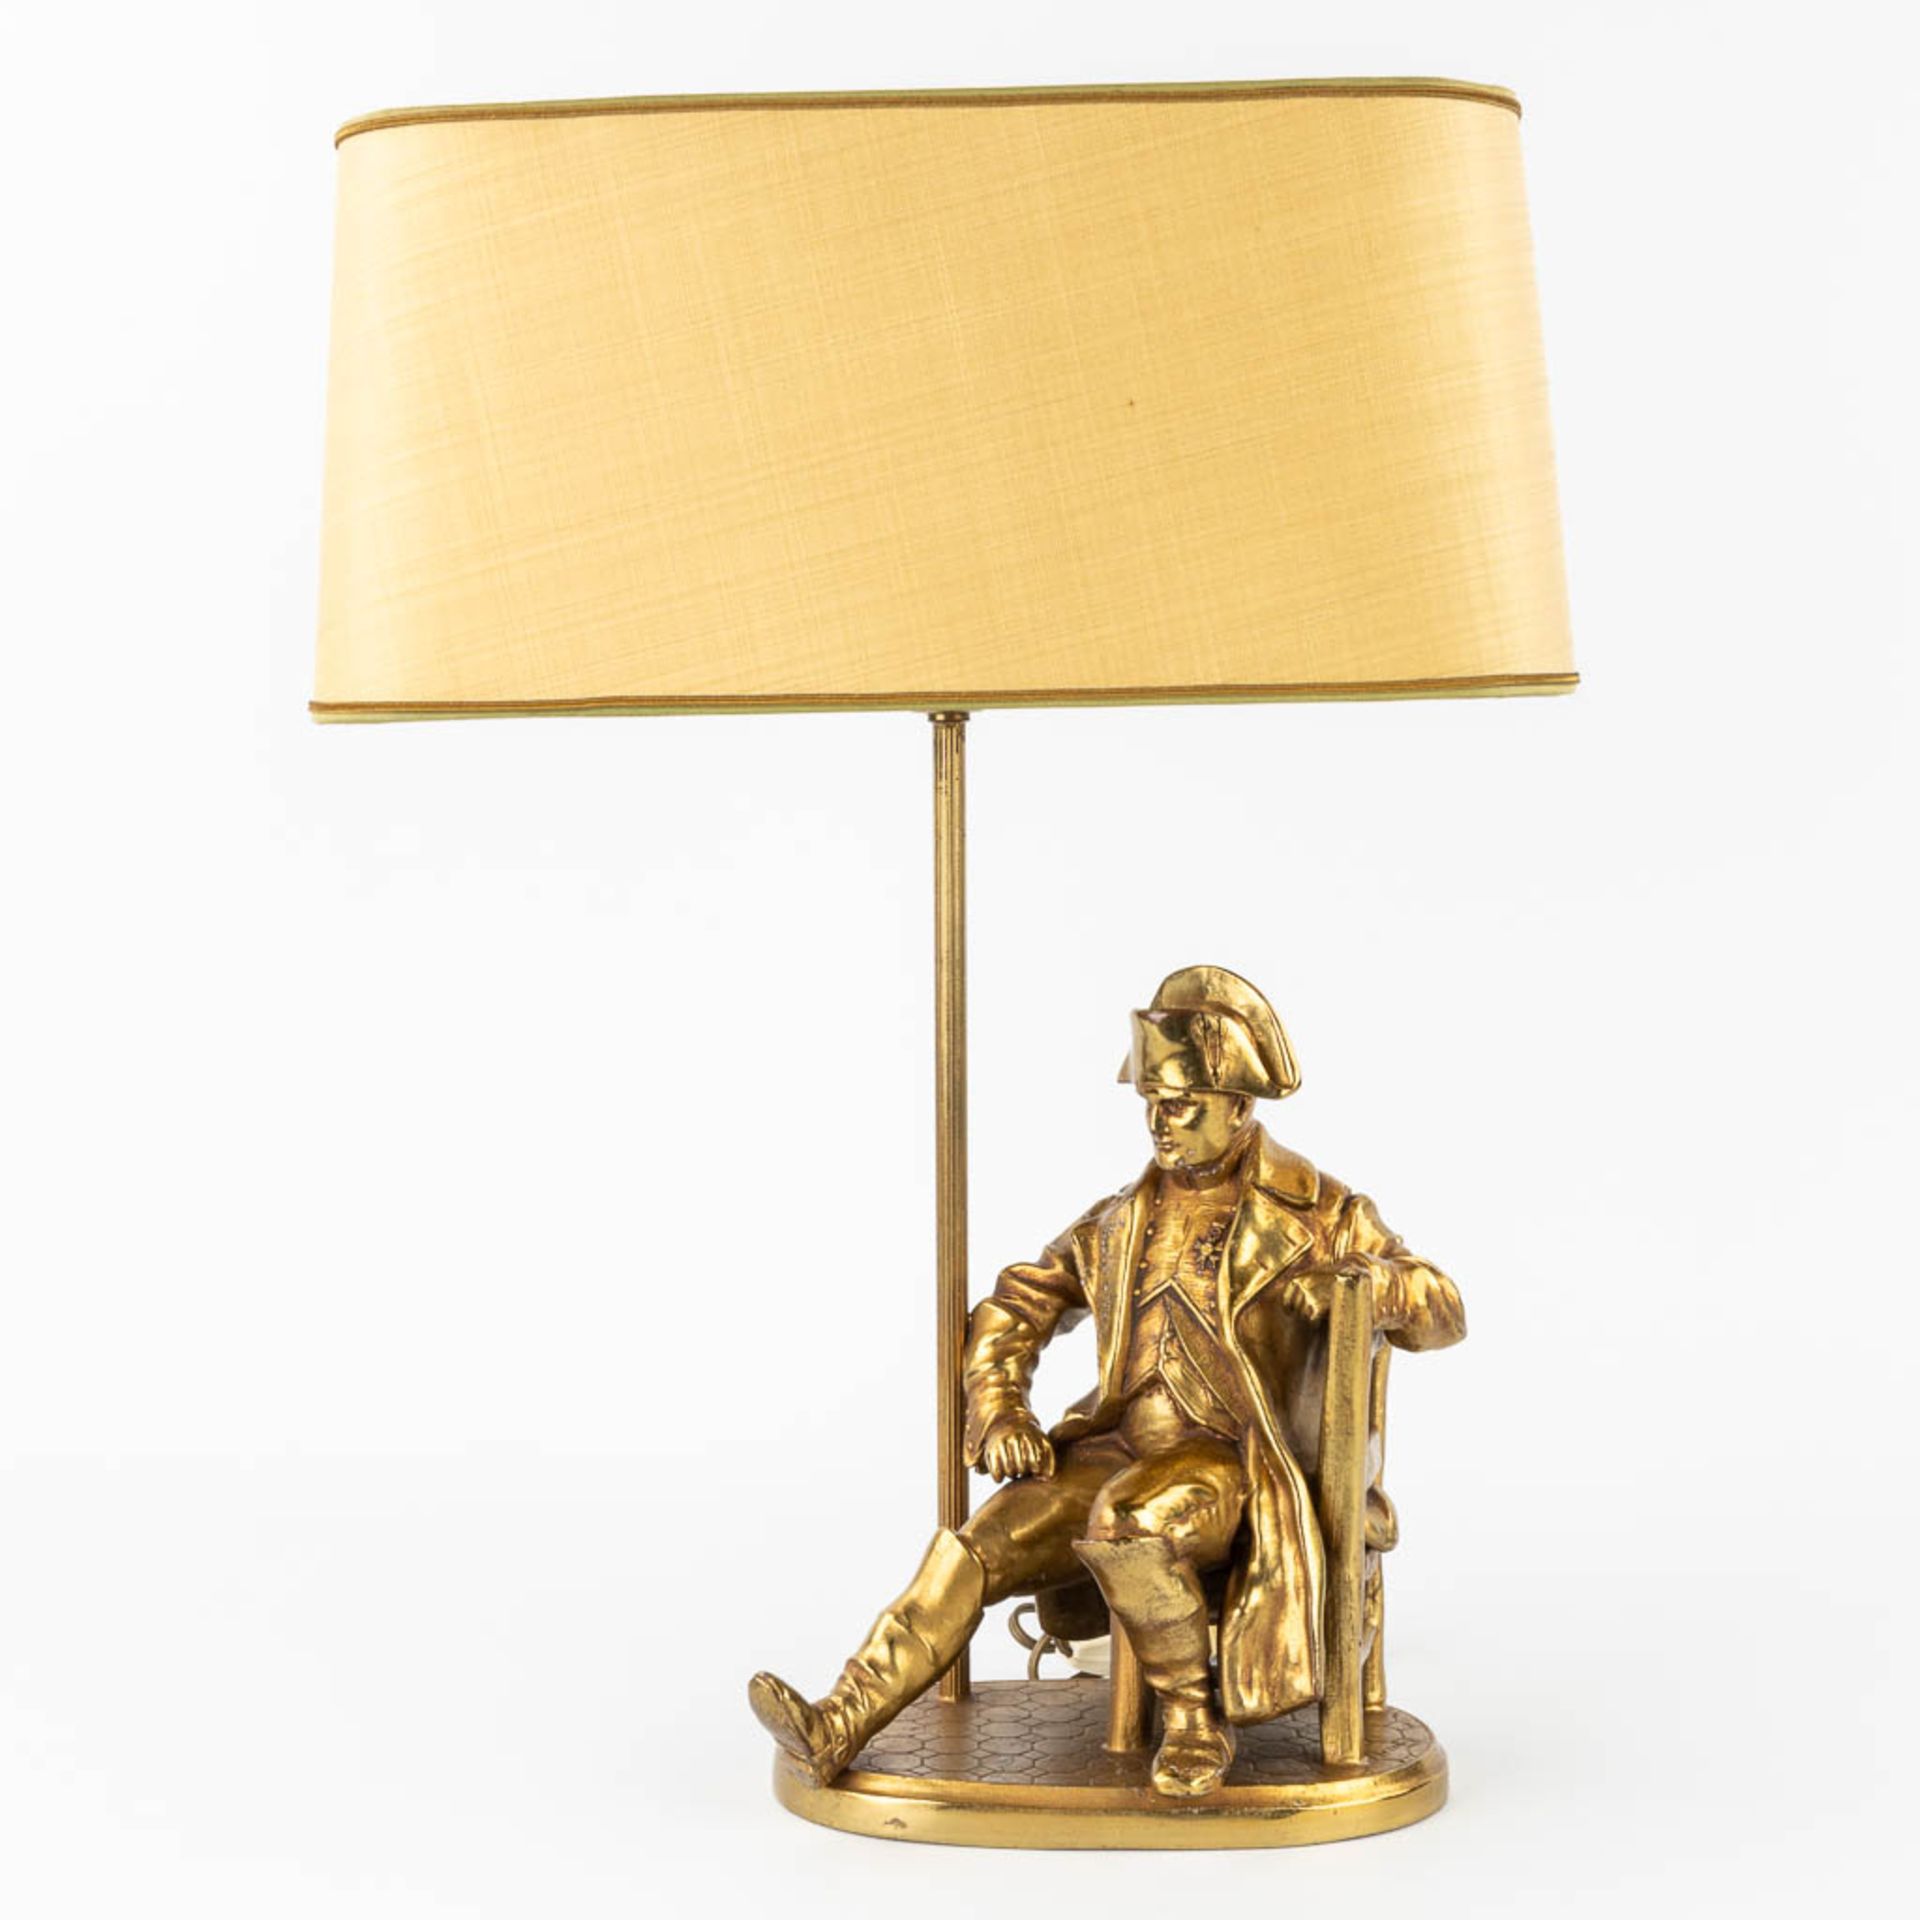 A collection of 2 table lamps with statues of Napoleon Bonaparte. (H:38 cm) - Image 12 of 18